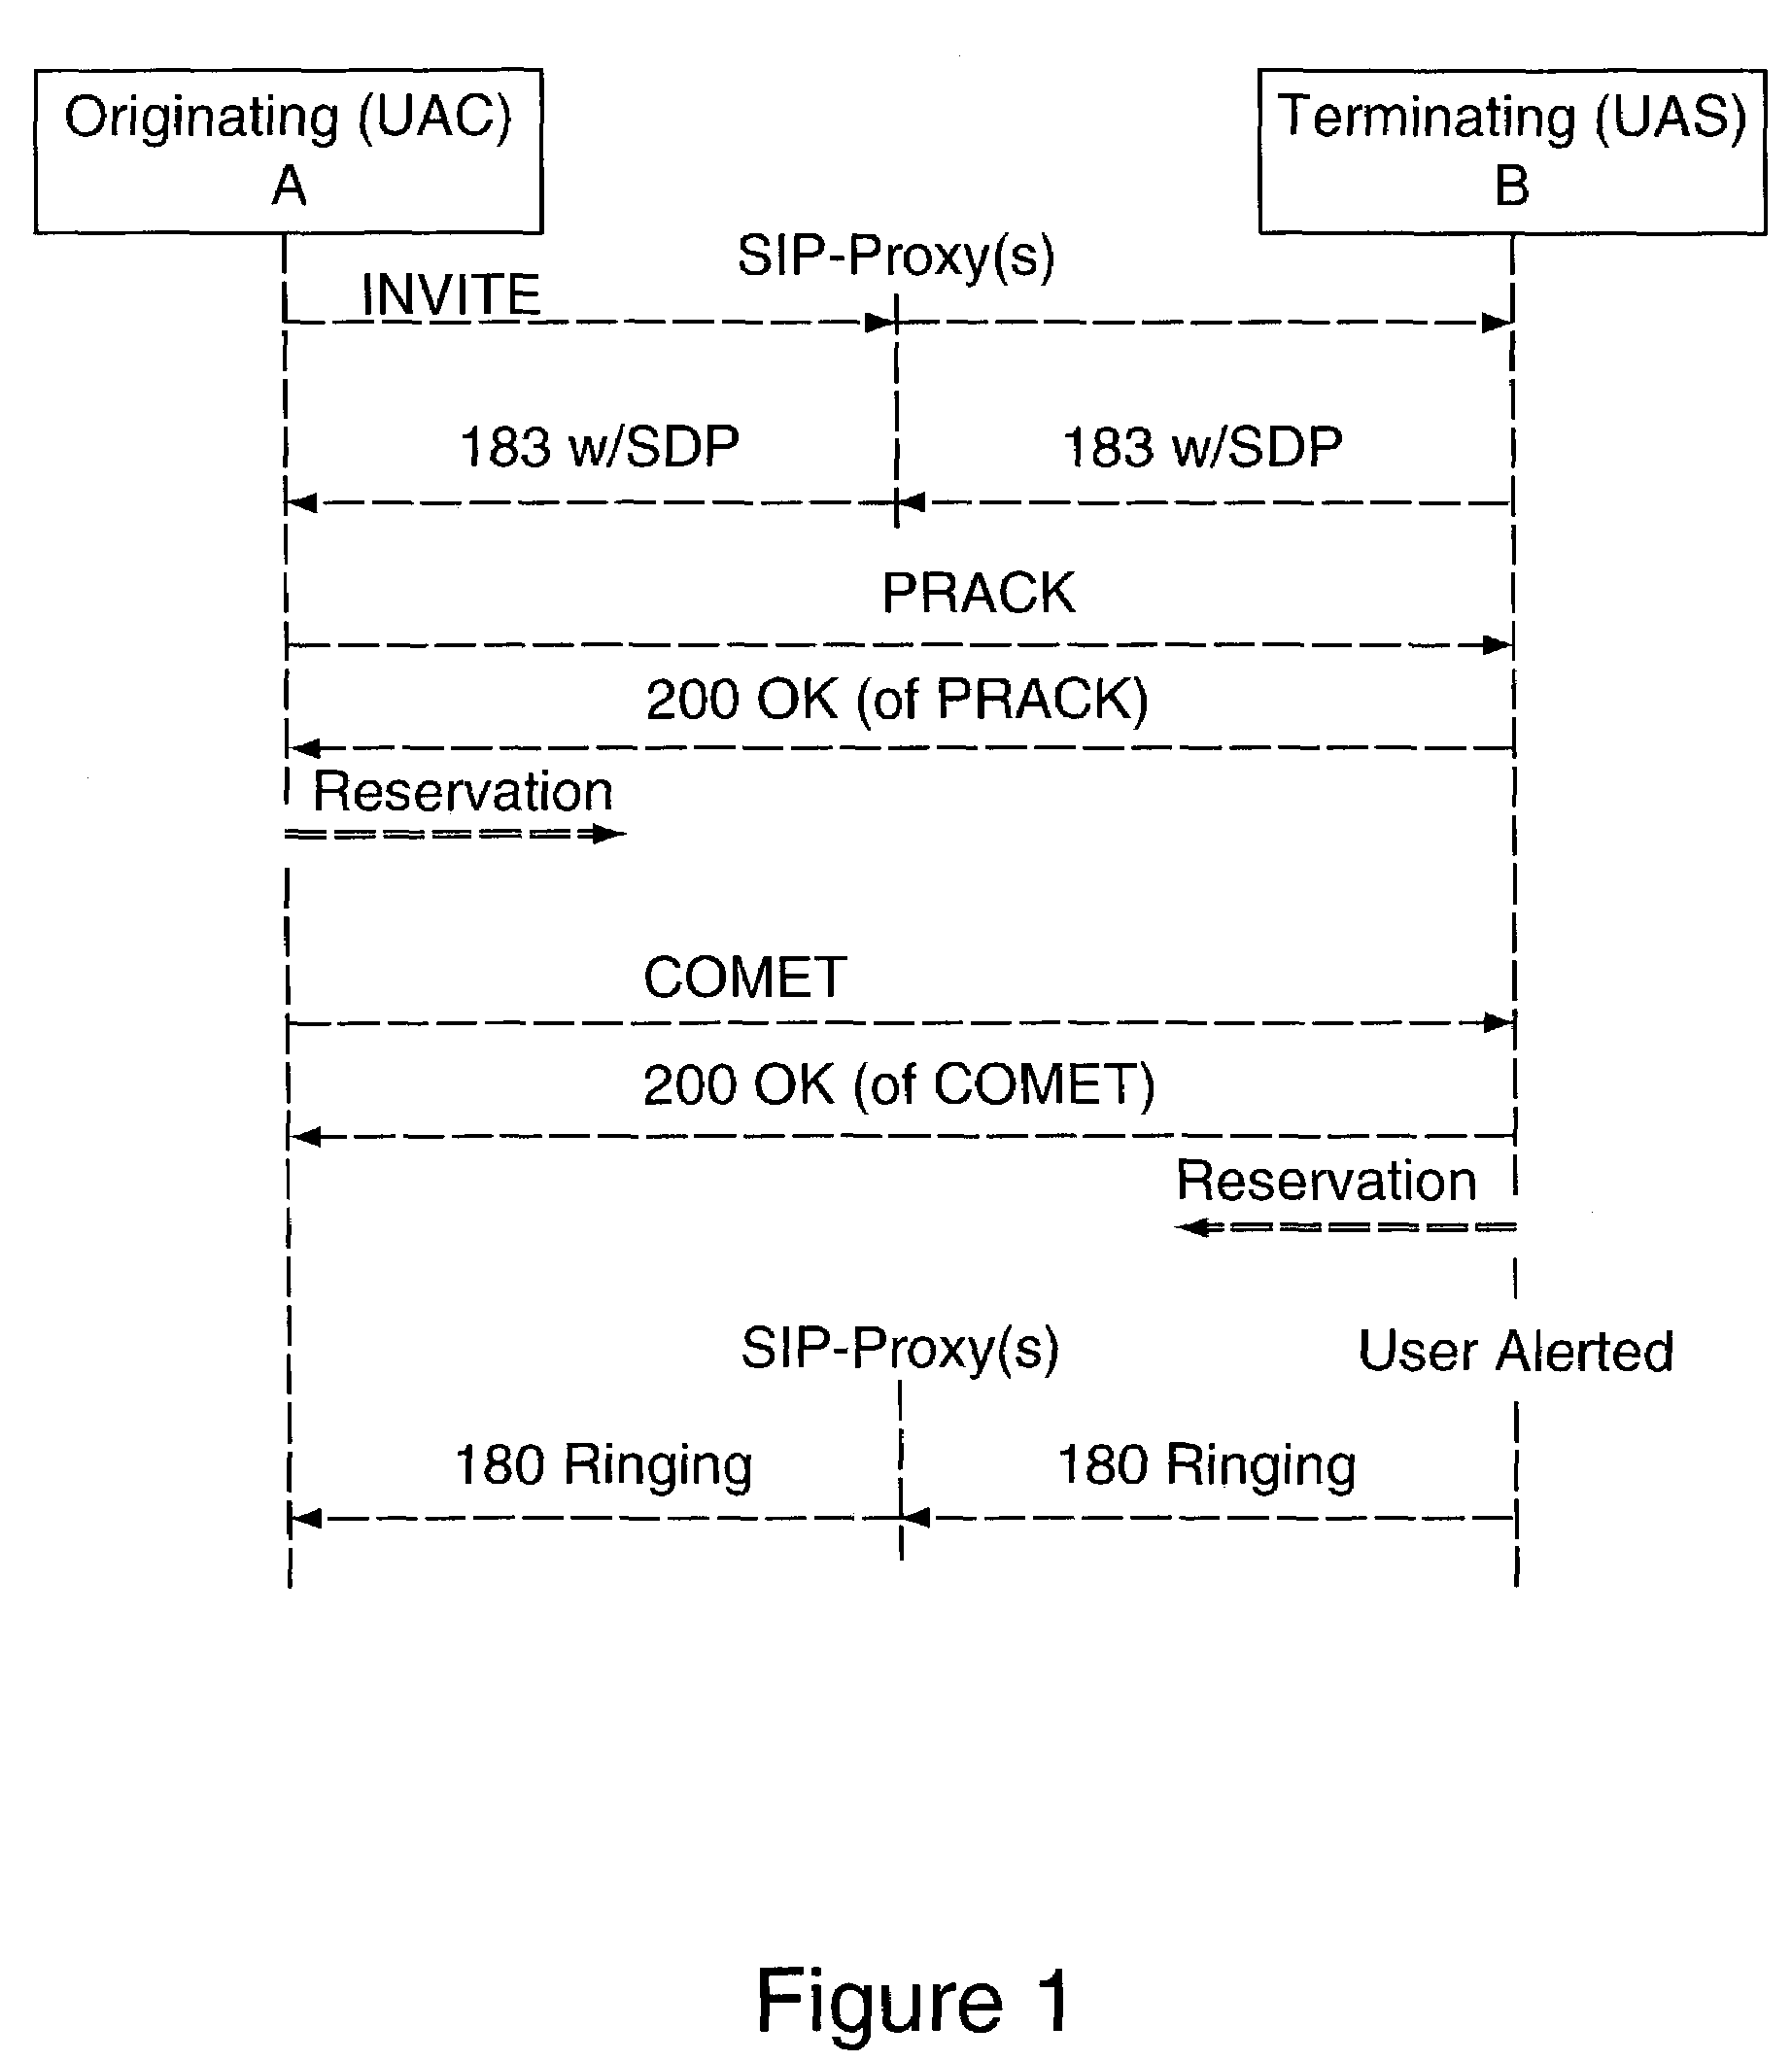 Methods for enhancing SDP preconditions signalling for IP multimedia sessions